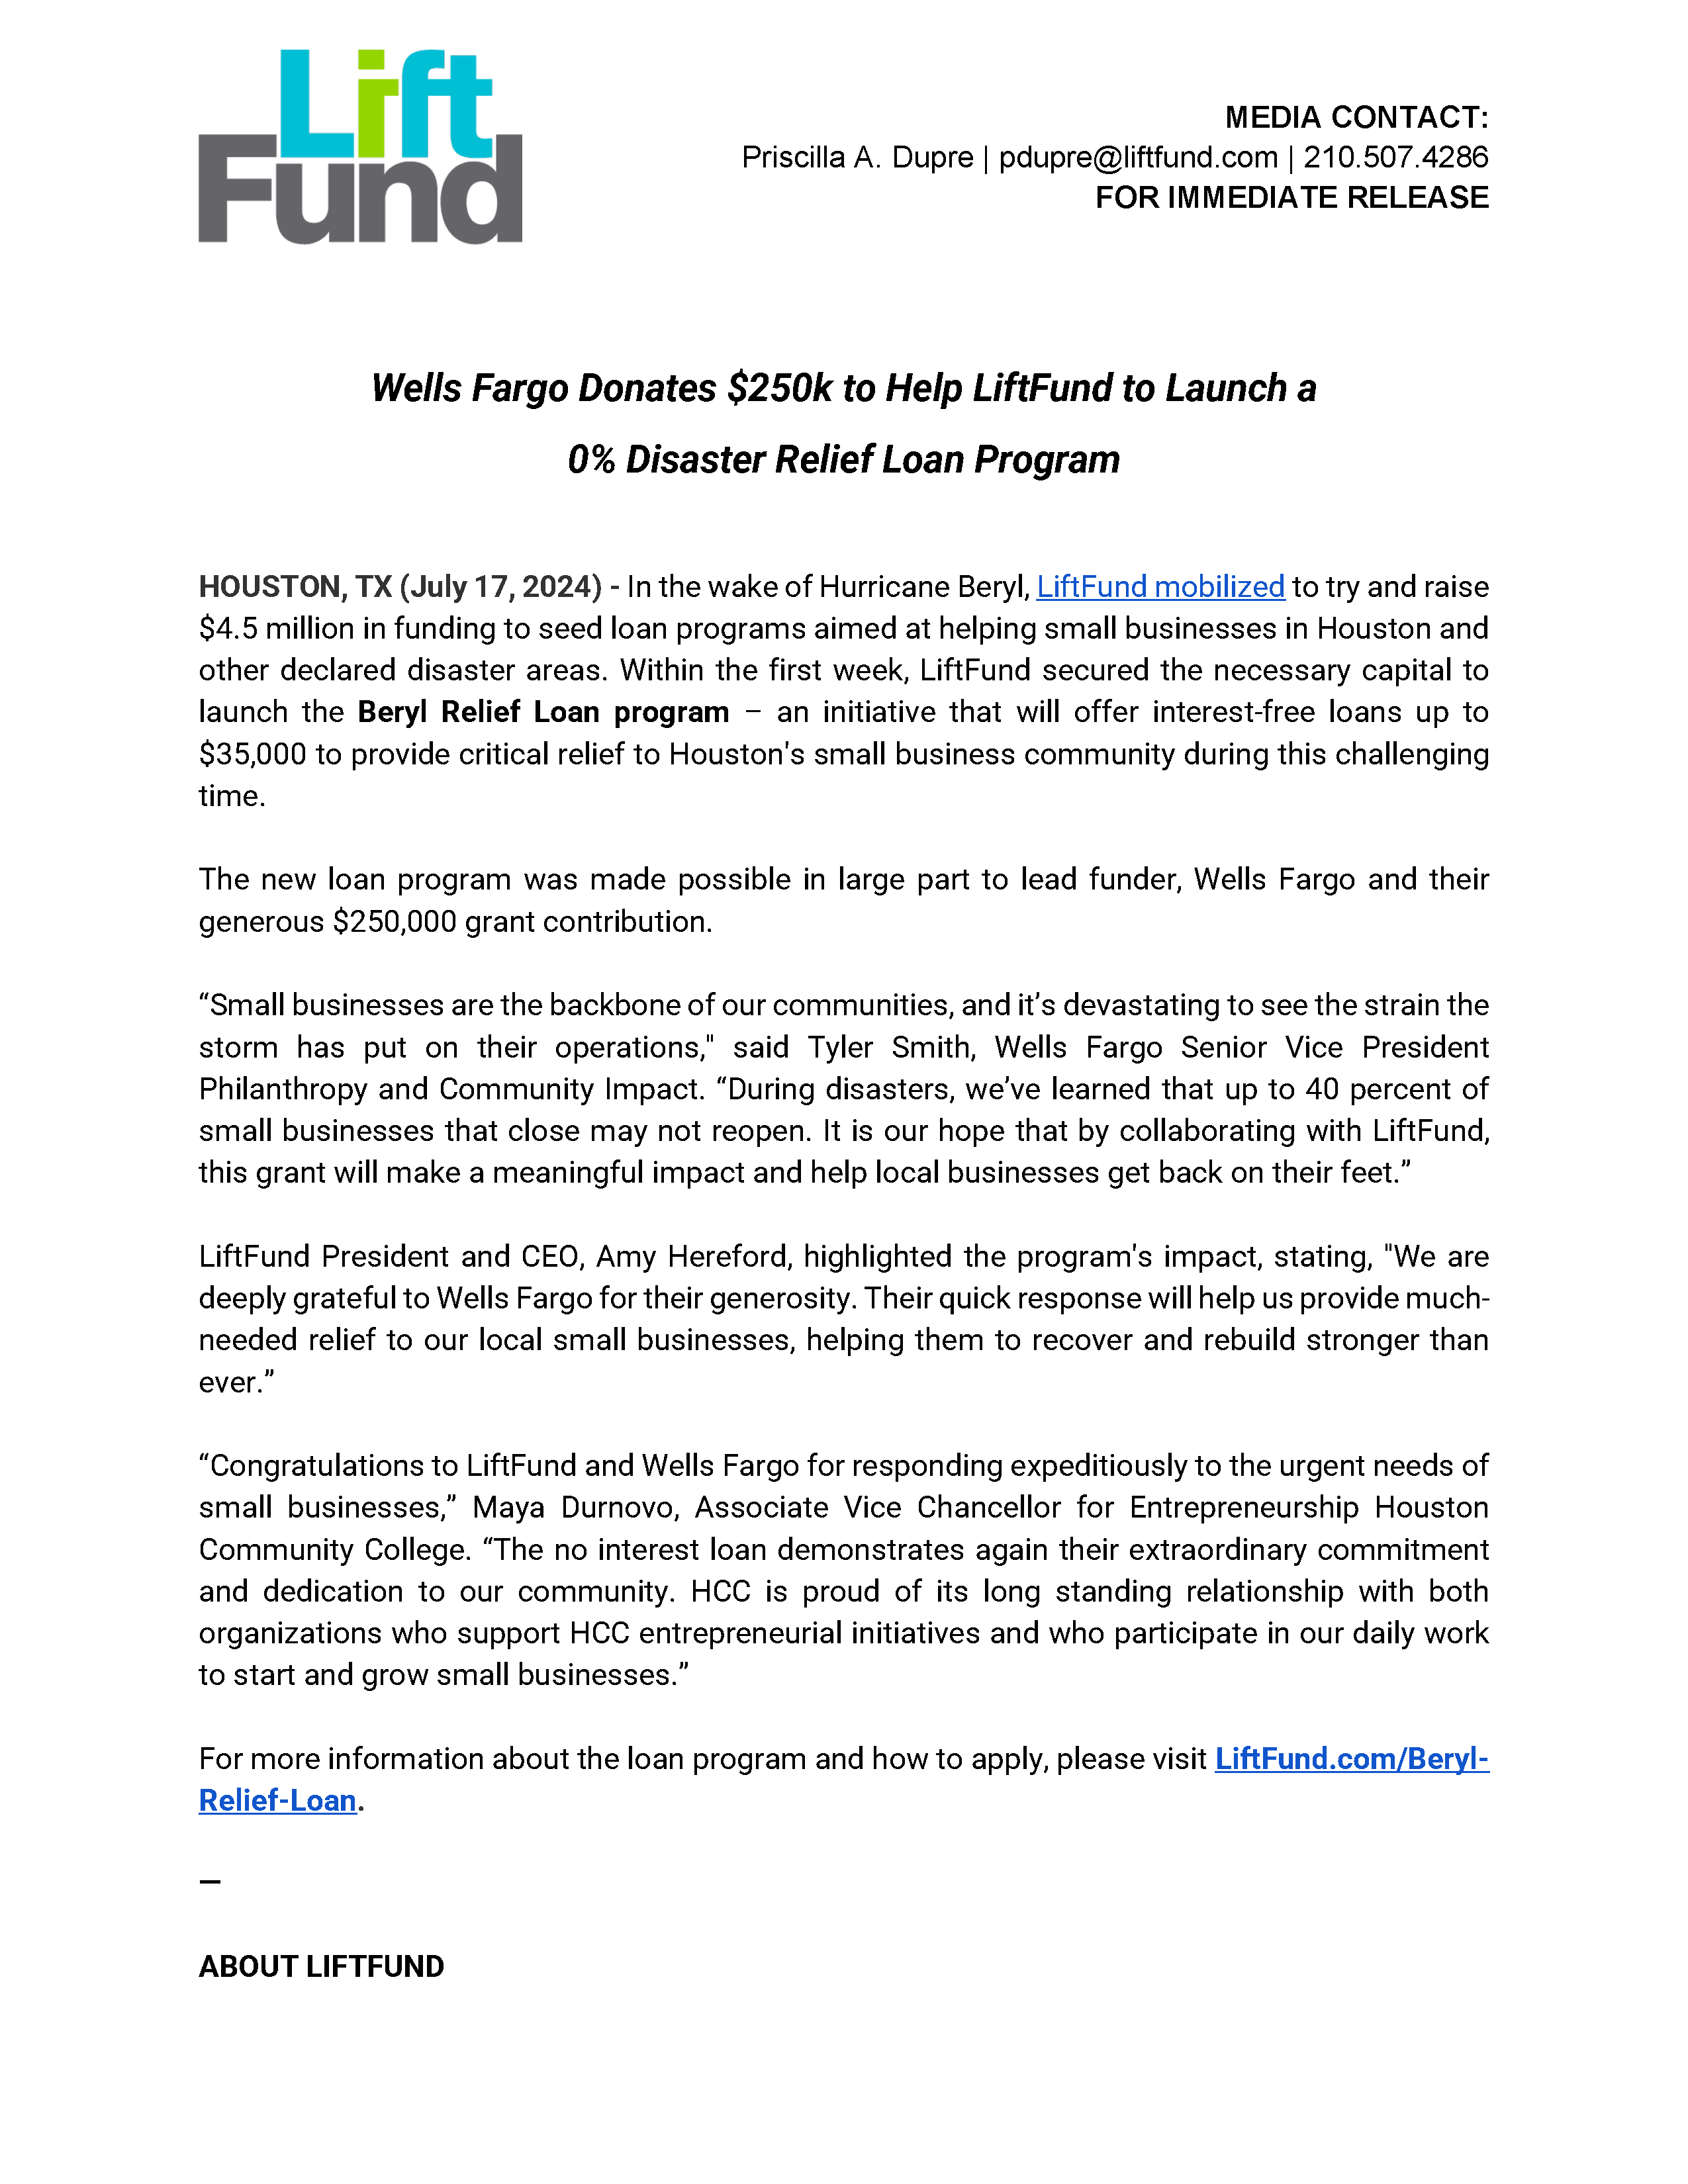 07.17.2024. UPDATED Press Release LiftFund and Wells Fargo Hurricane Beryl Relief (1)_Page_1